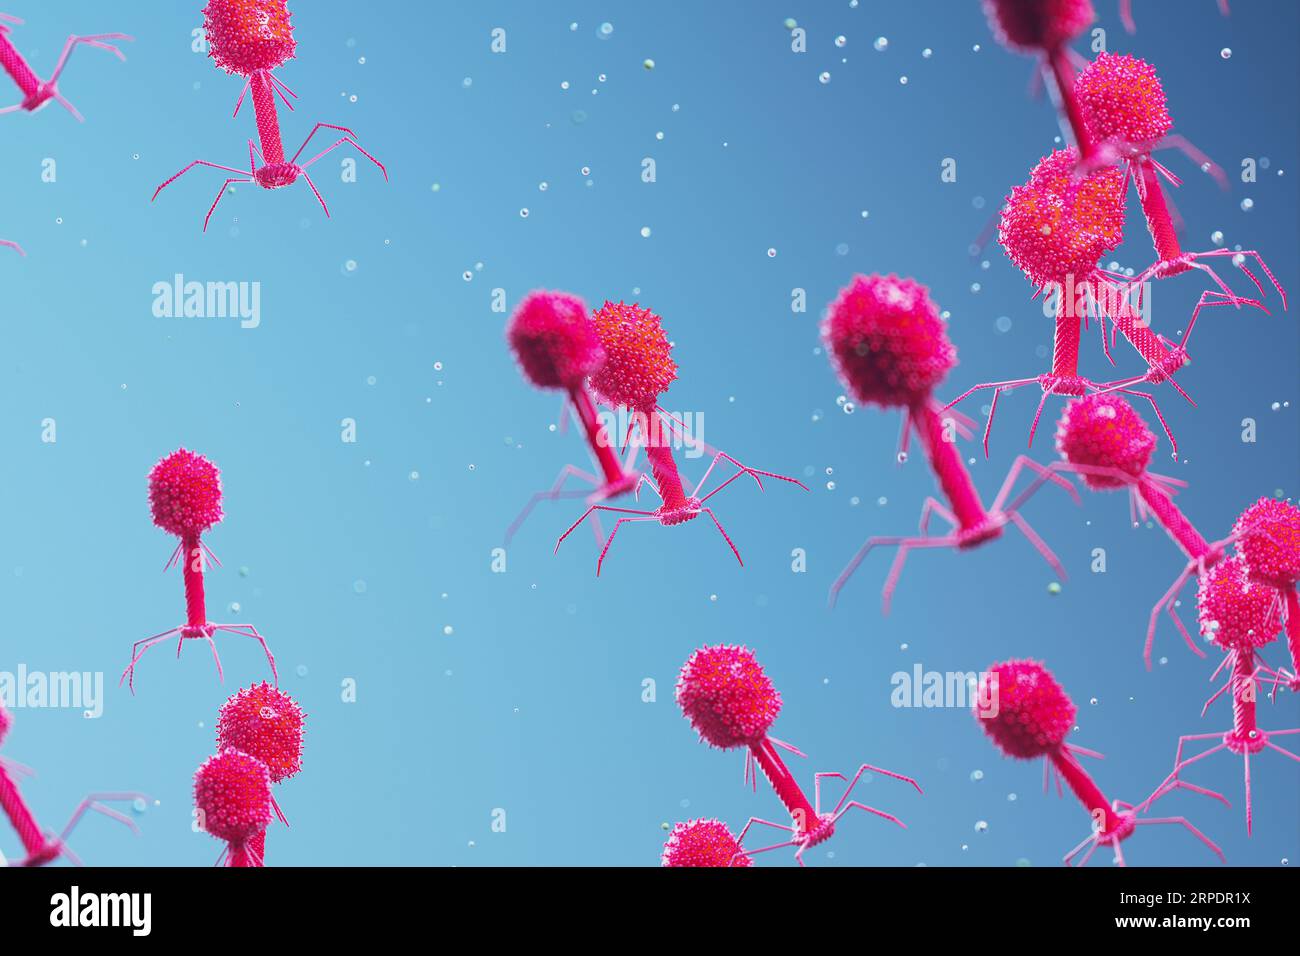 Many bacteriophages or phages floating and slowly moving in the organism. Stock Photo